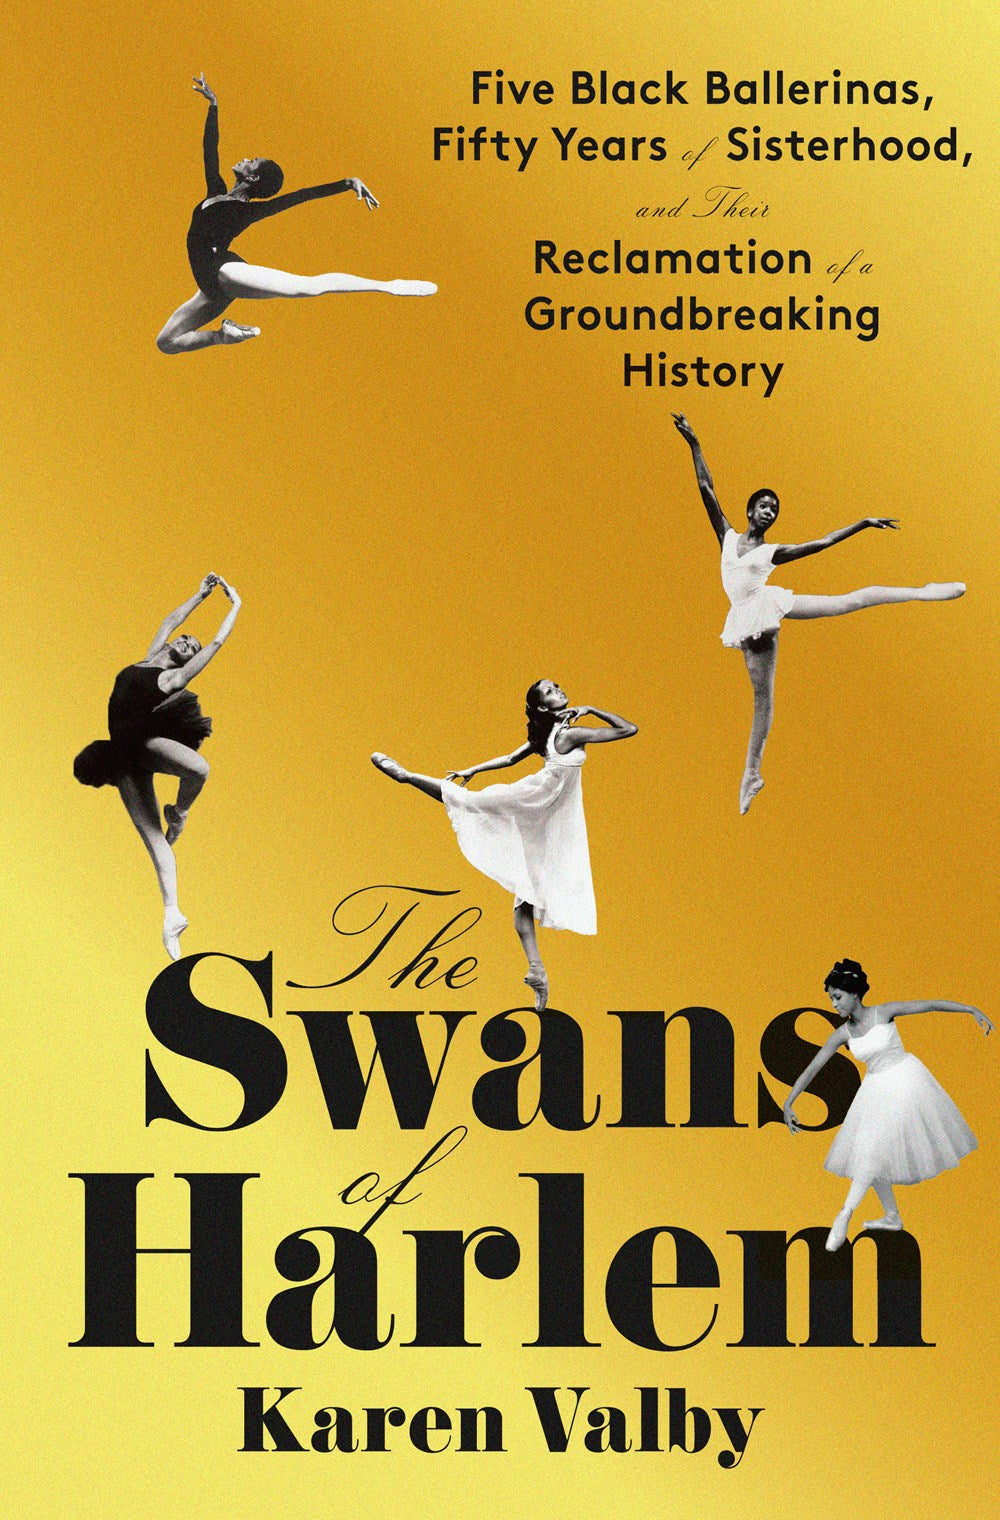 The Swans of Harlem: Five Black Ballerinas, Fifty Years of Sisterhood, and Their Reclamation of a Groundbreaking History (April 30th, 2024)